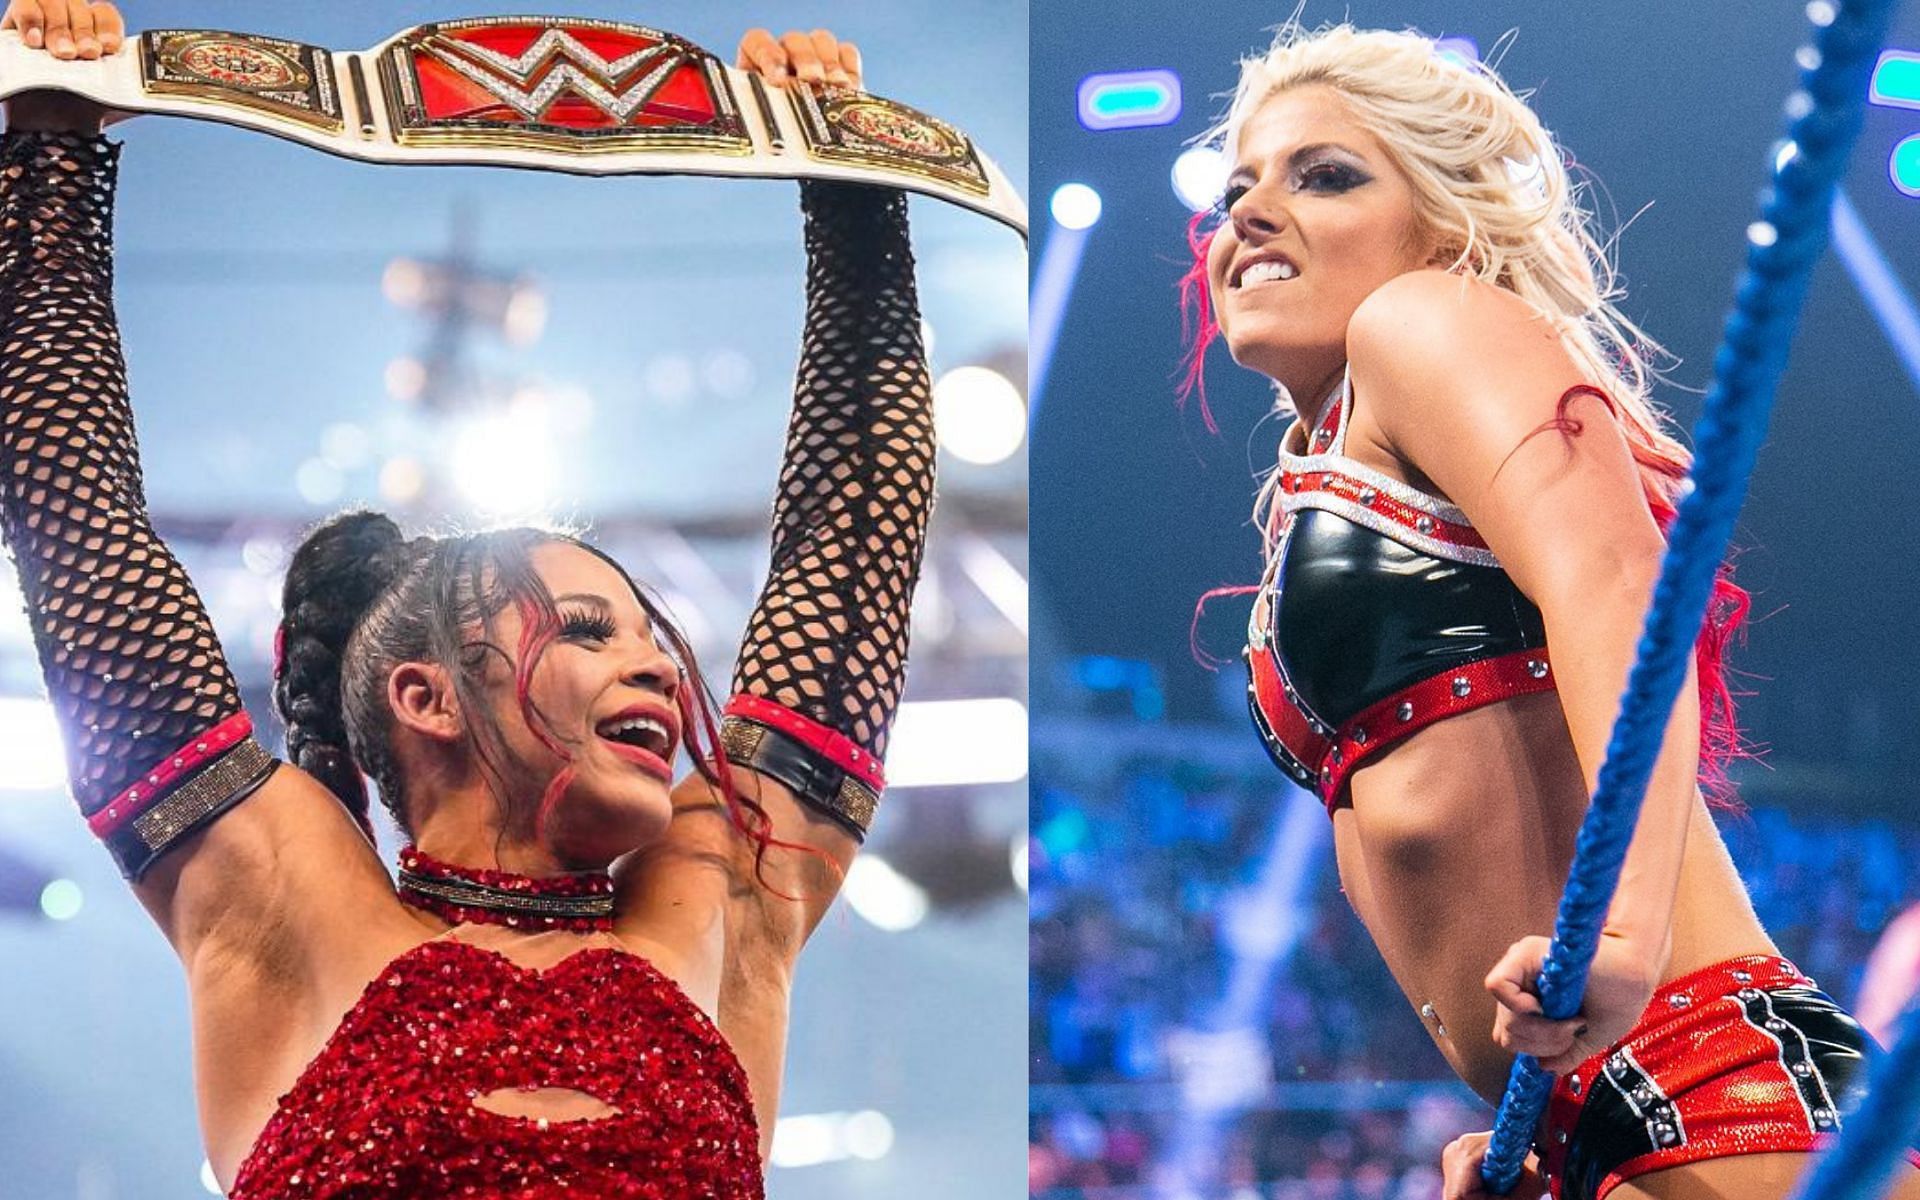 Bianca Belair has never been one-on-one with Alexa Bliss